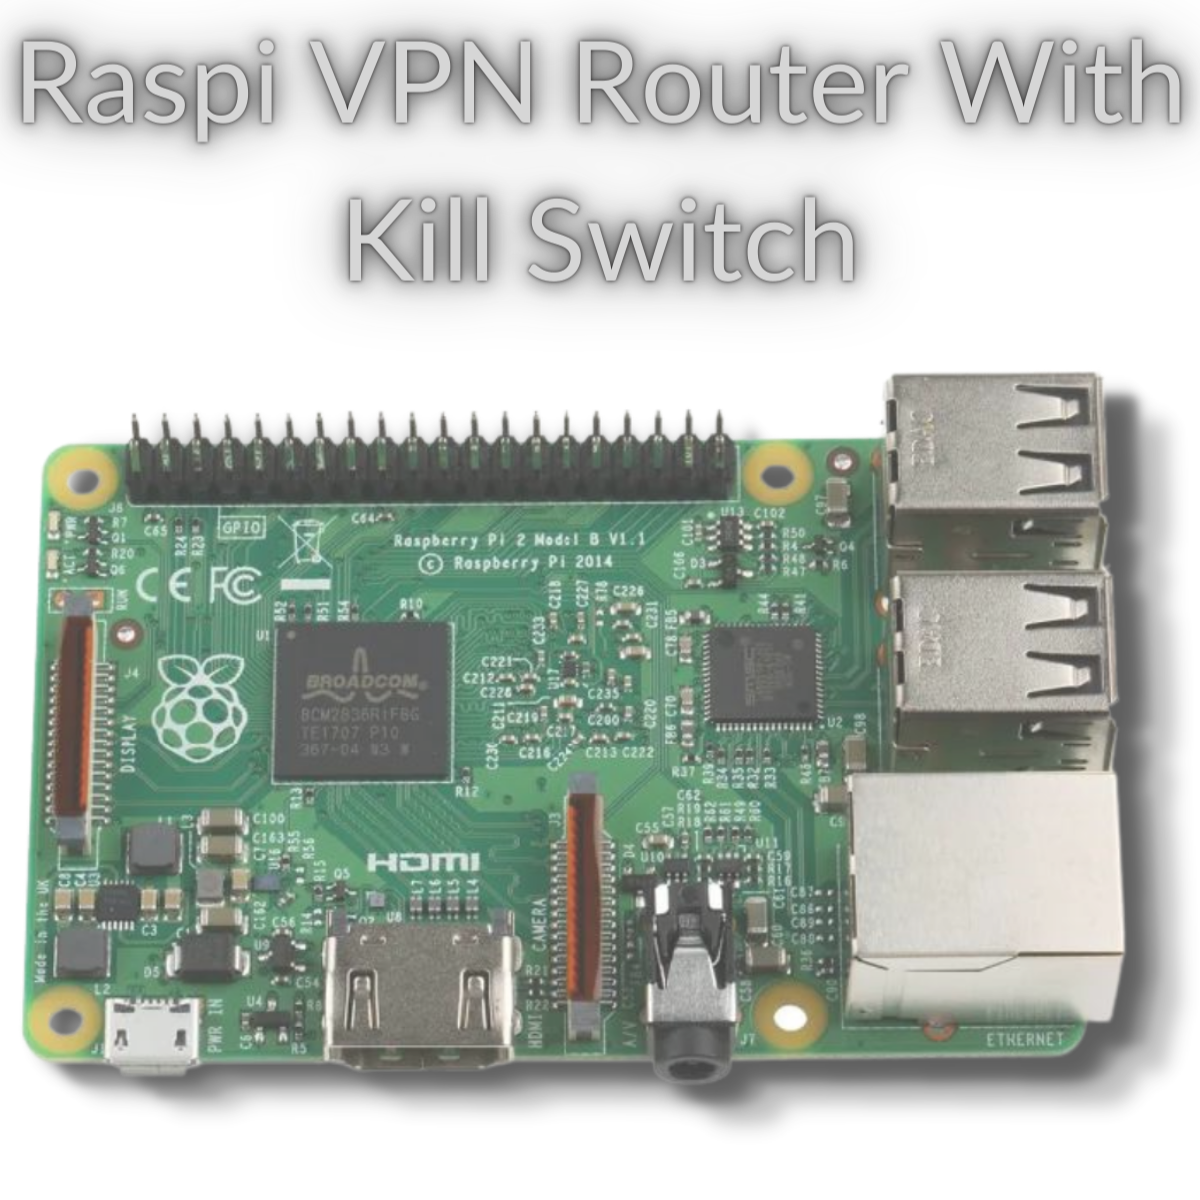 How to Setup Your Raspberry Pi As A VPN Router With A Kill Switch